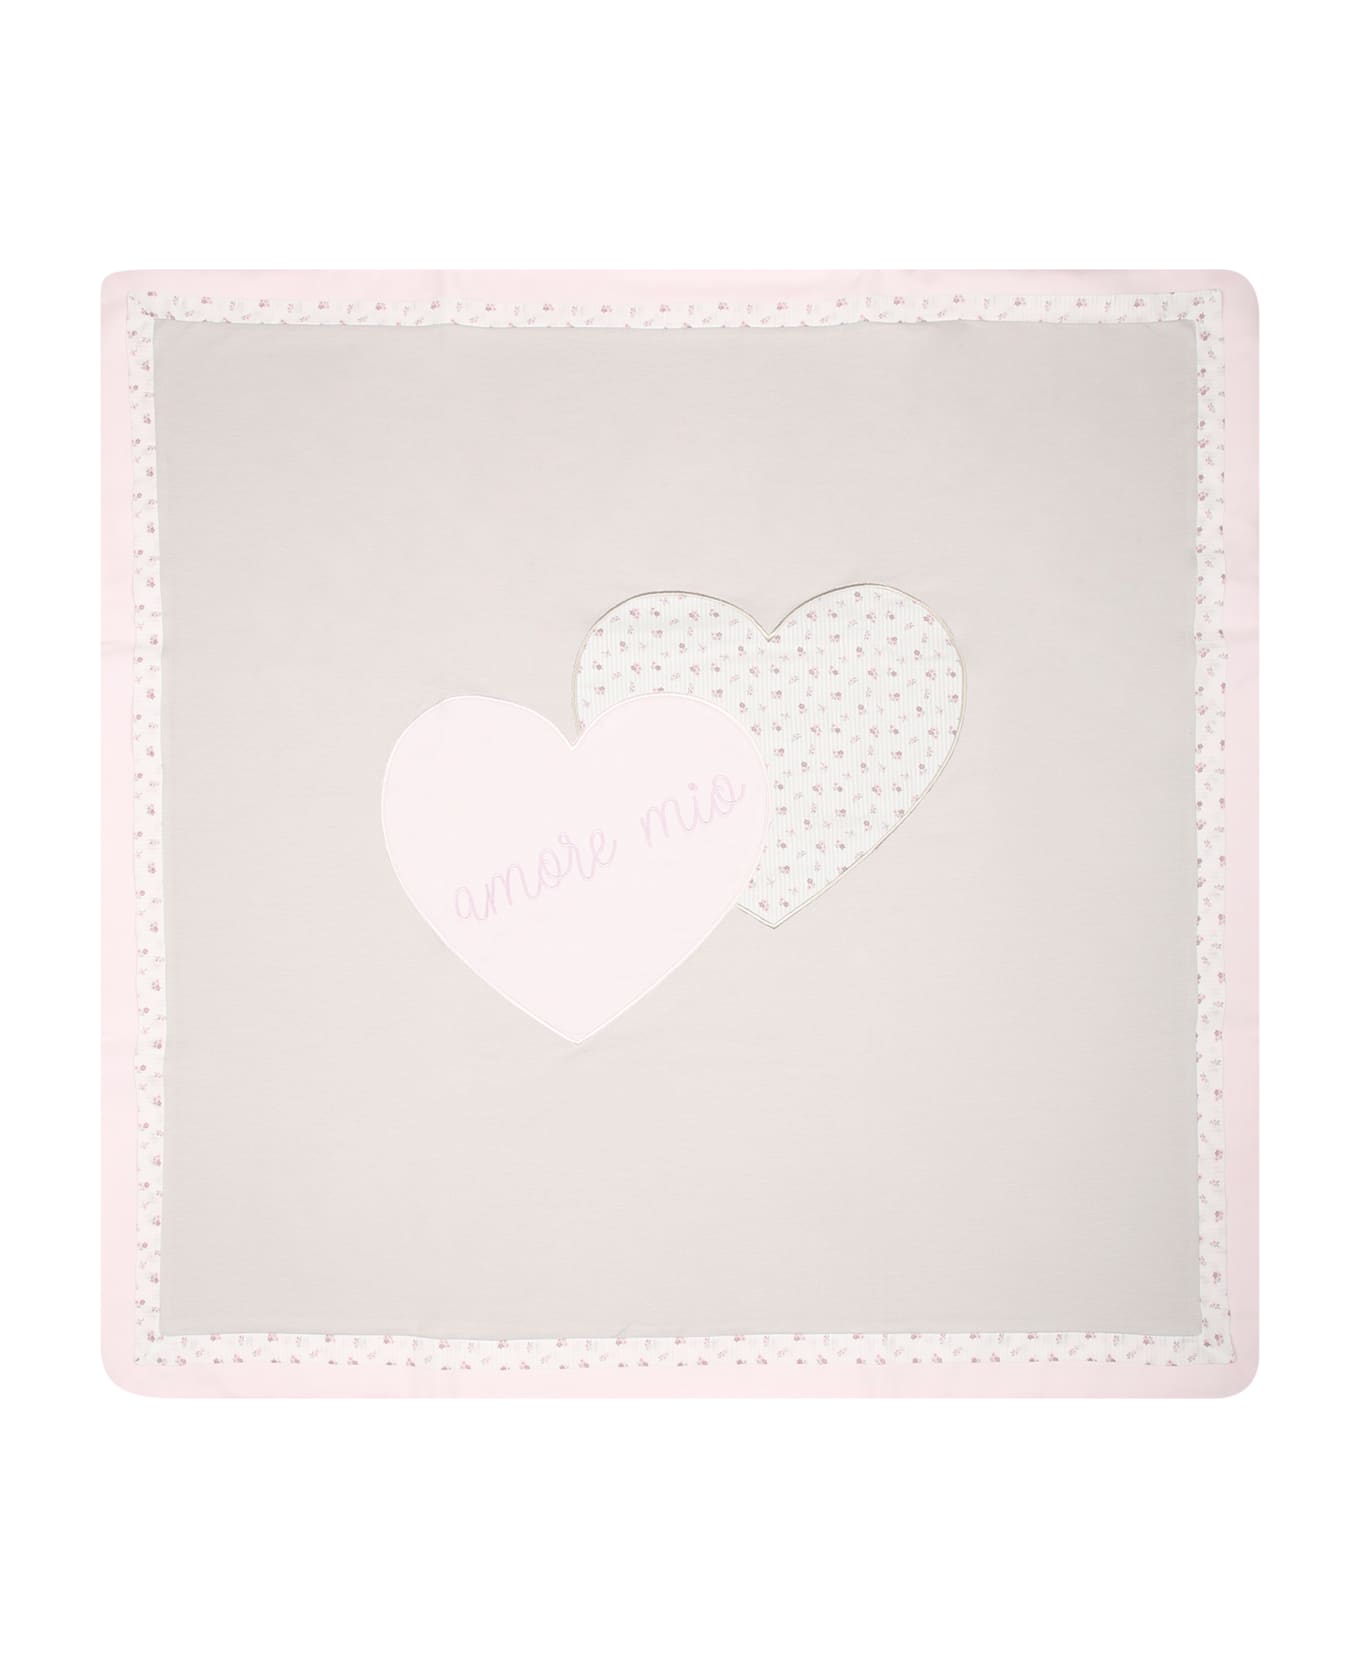 La stupenderia Beige Blanket For Baby Girl With Hearts And Writing - Beige アクセサリー＆ギフト